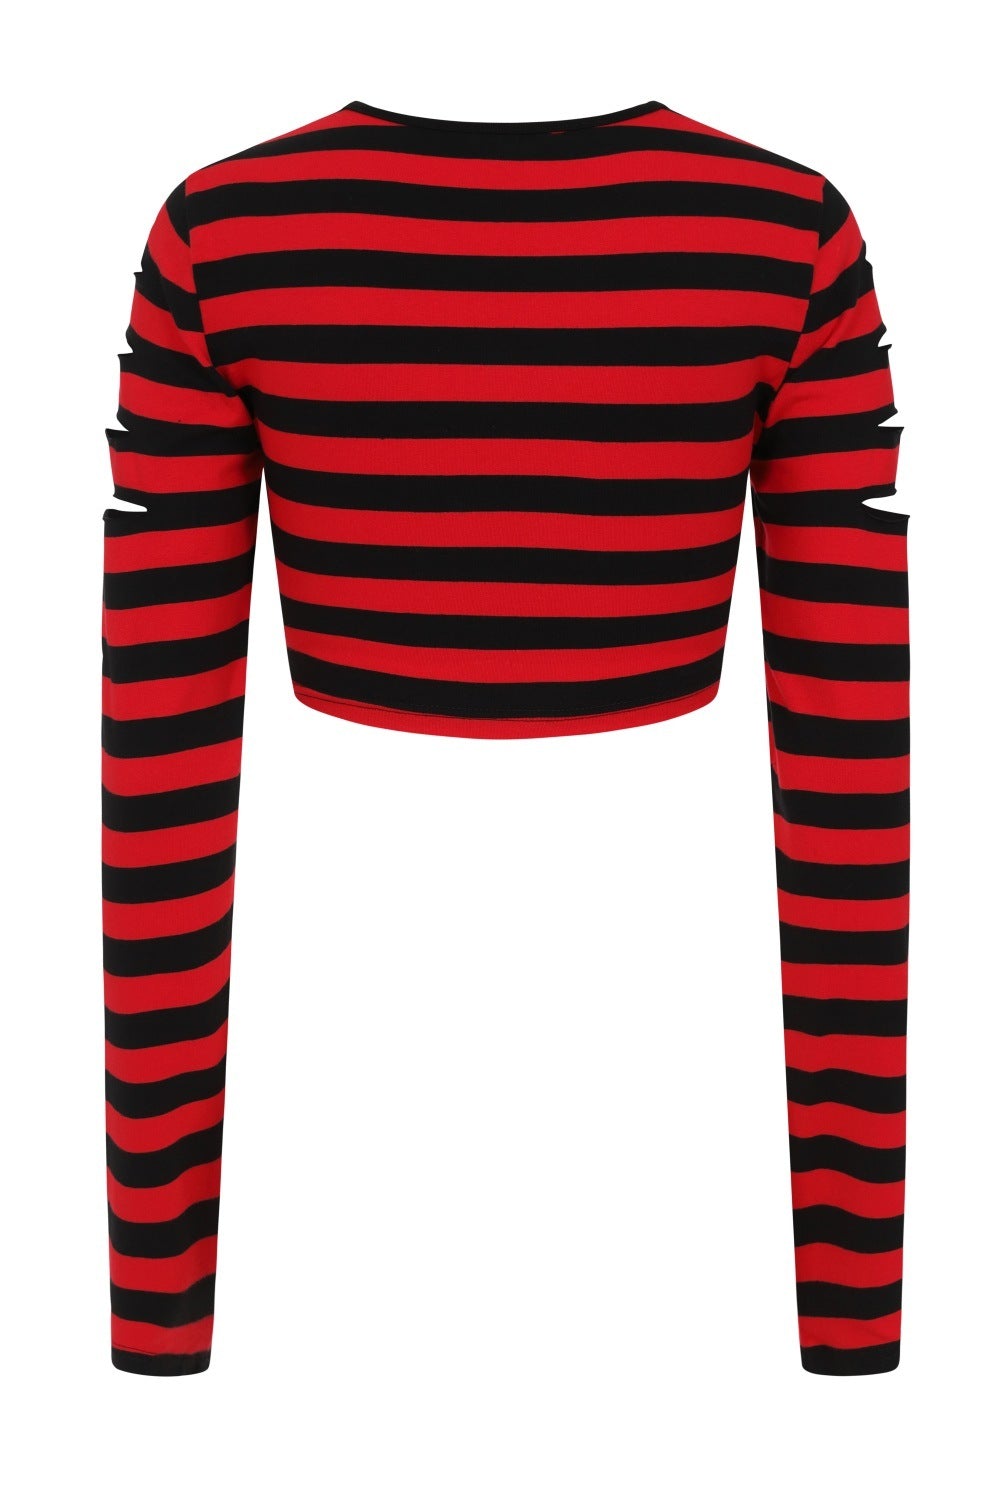 Ghost image of red and black stripped cropped top with ripped details